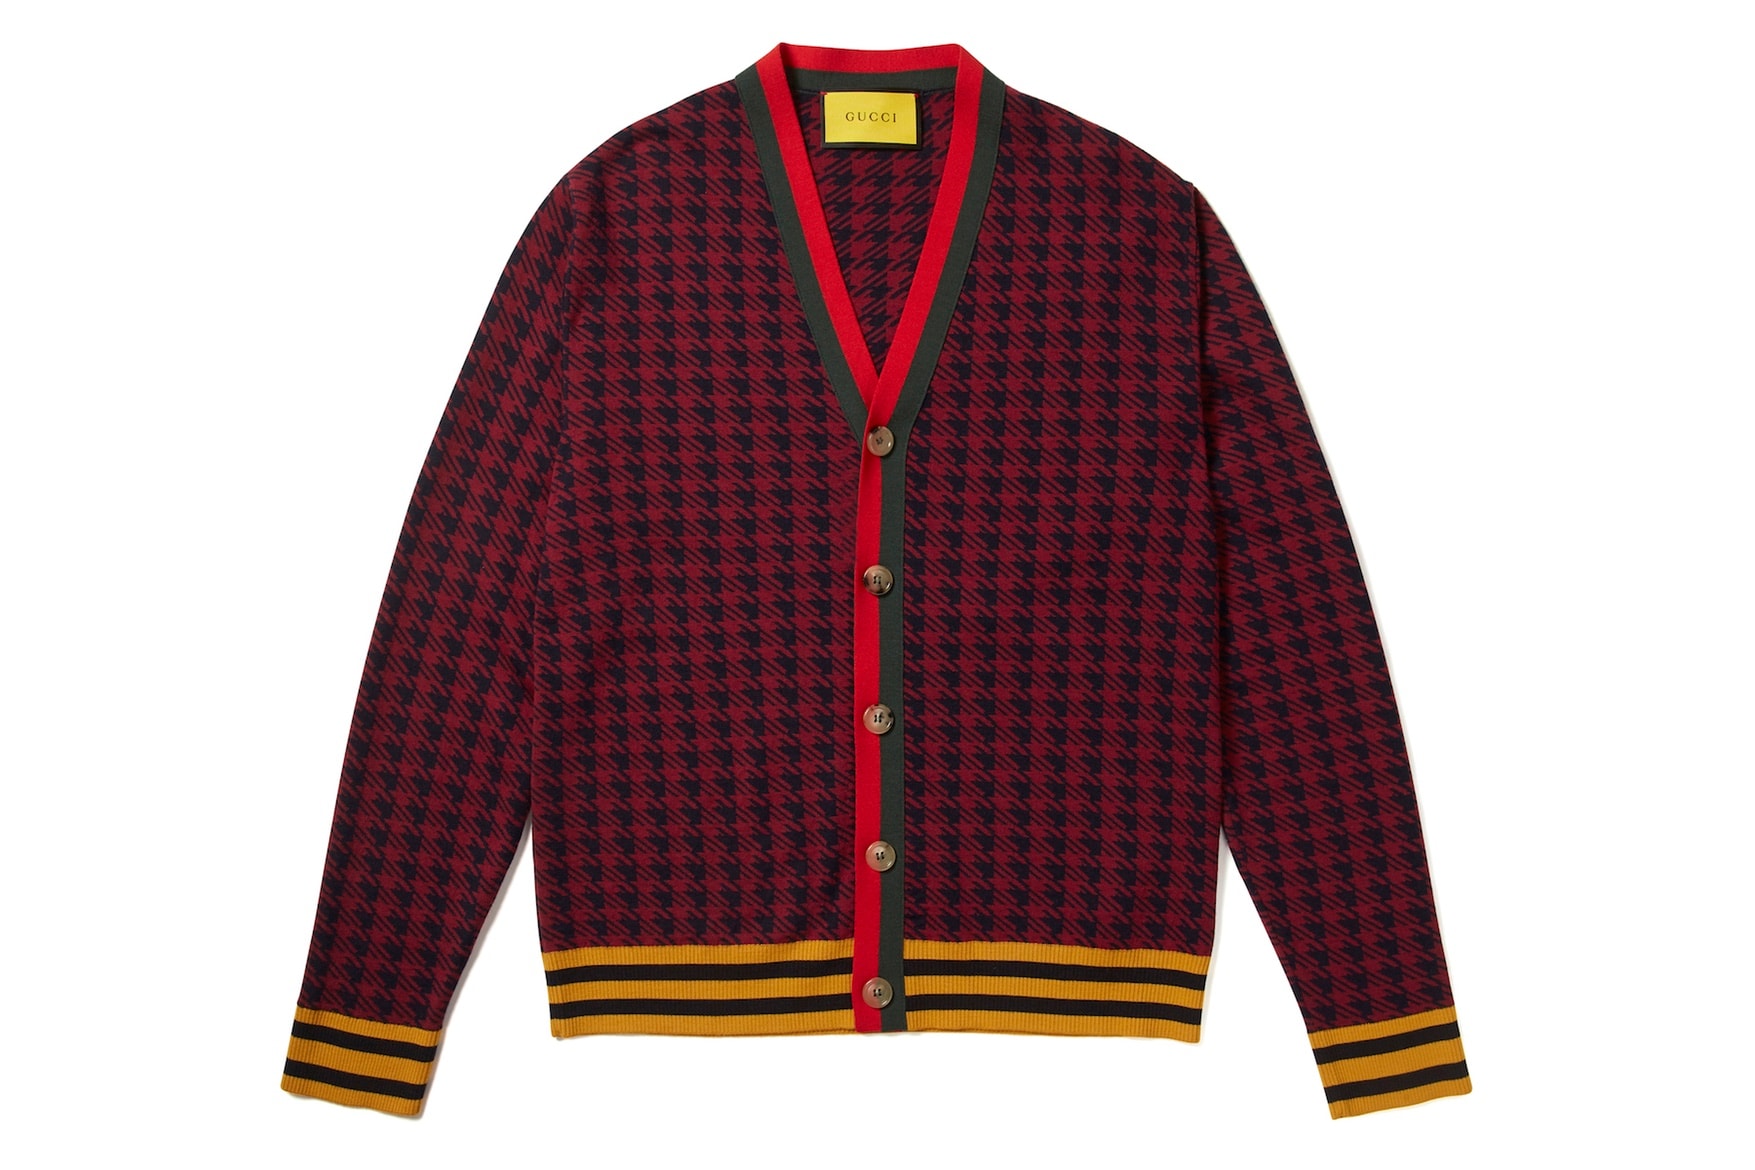 Gucci x Net-A-Porter & MR PORTER Collection | Hypebeast